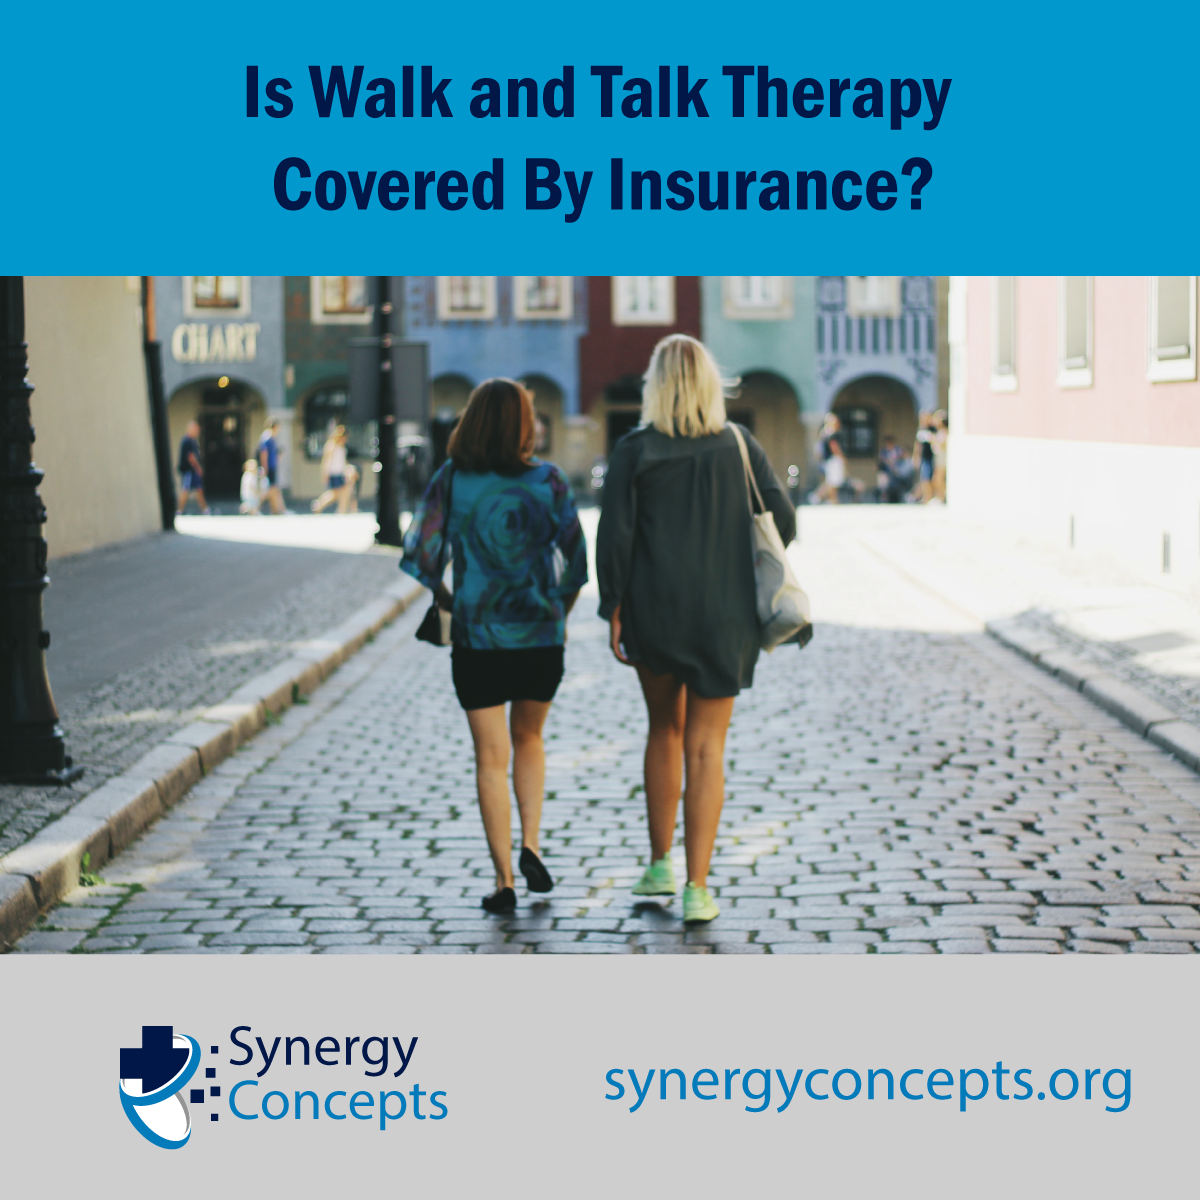 Is Walk and Talk Therapy Covered By Insurance?